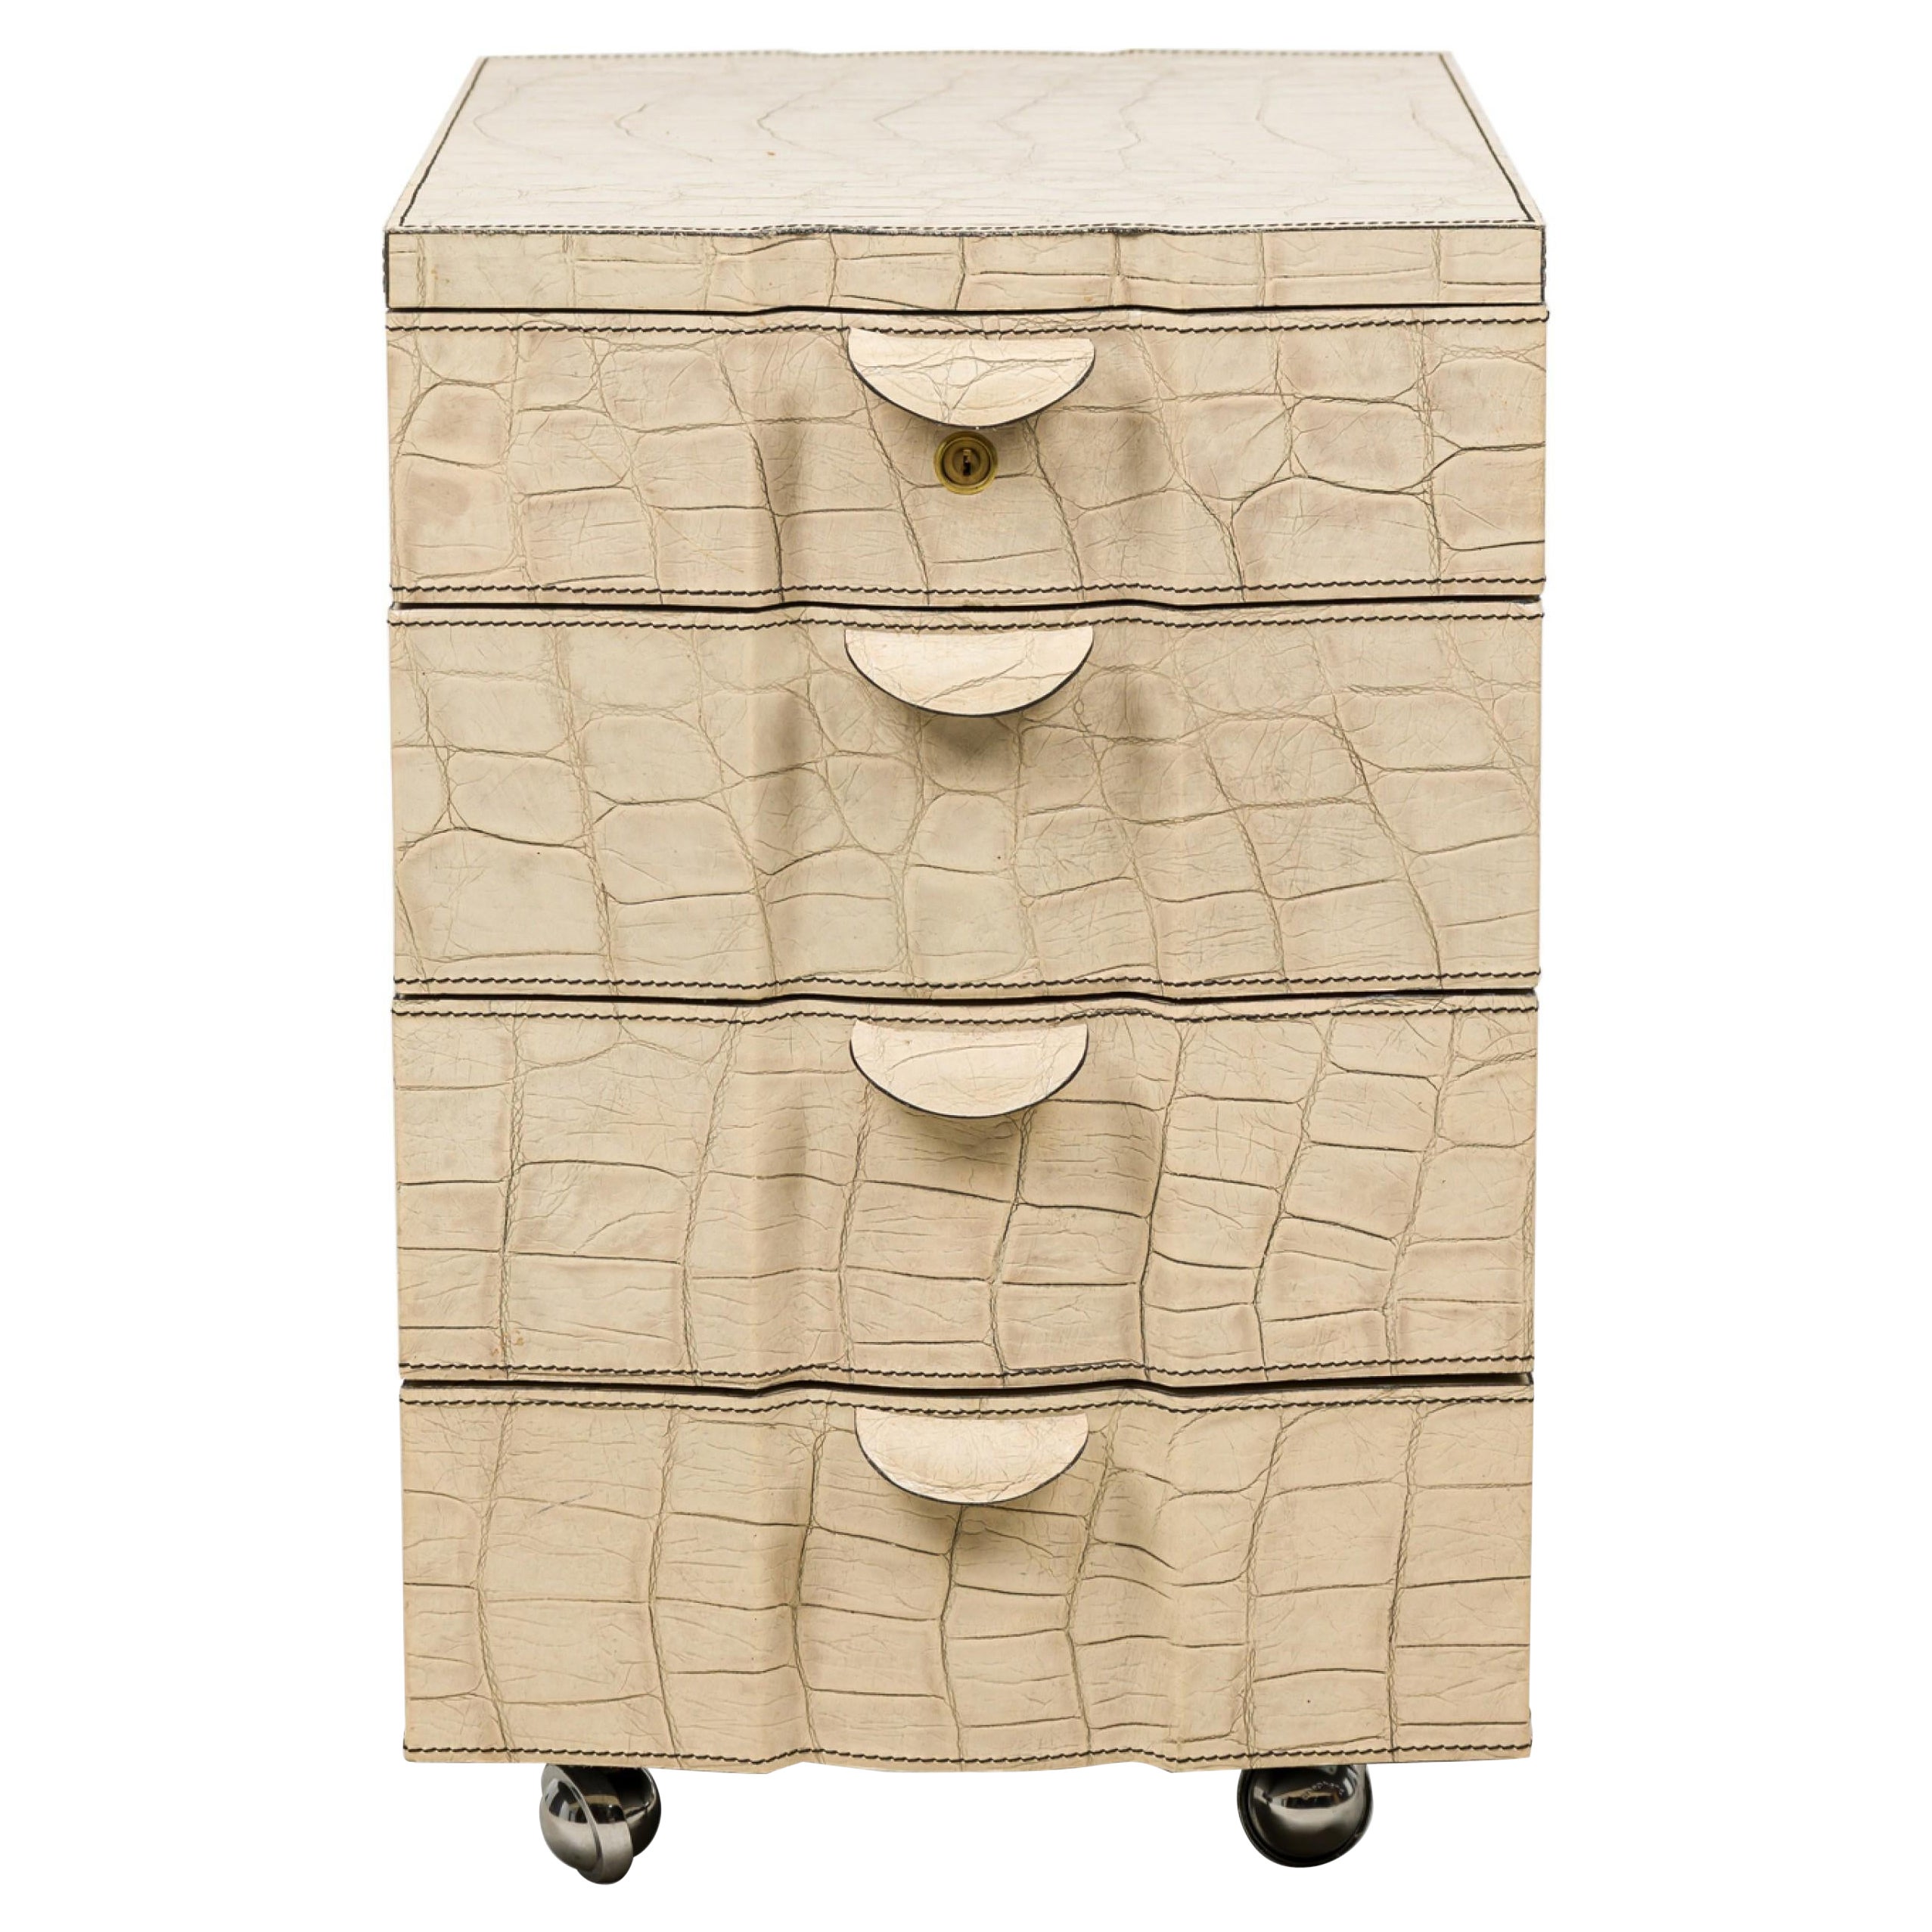 Embroidered Commodes and Chests of Drawers